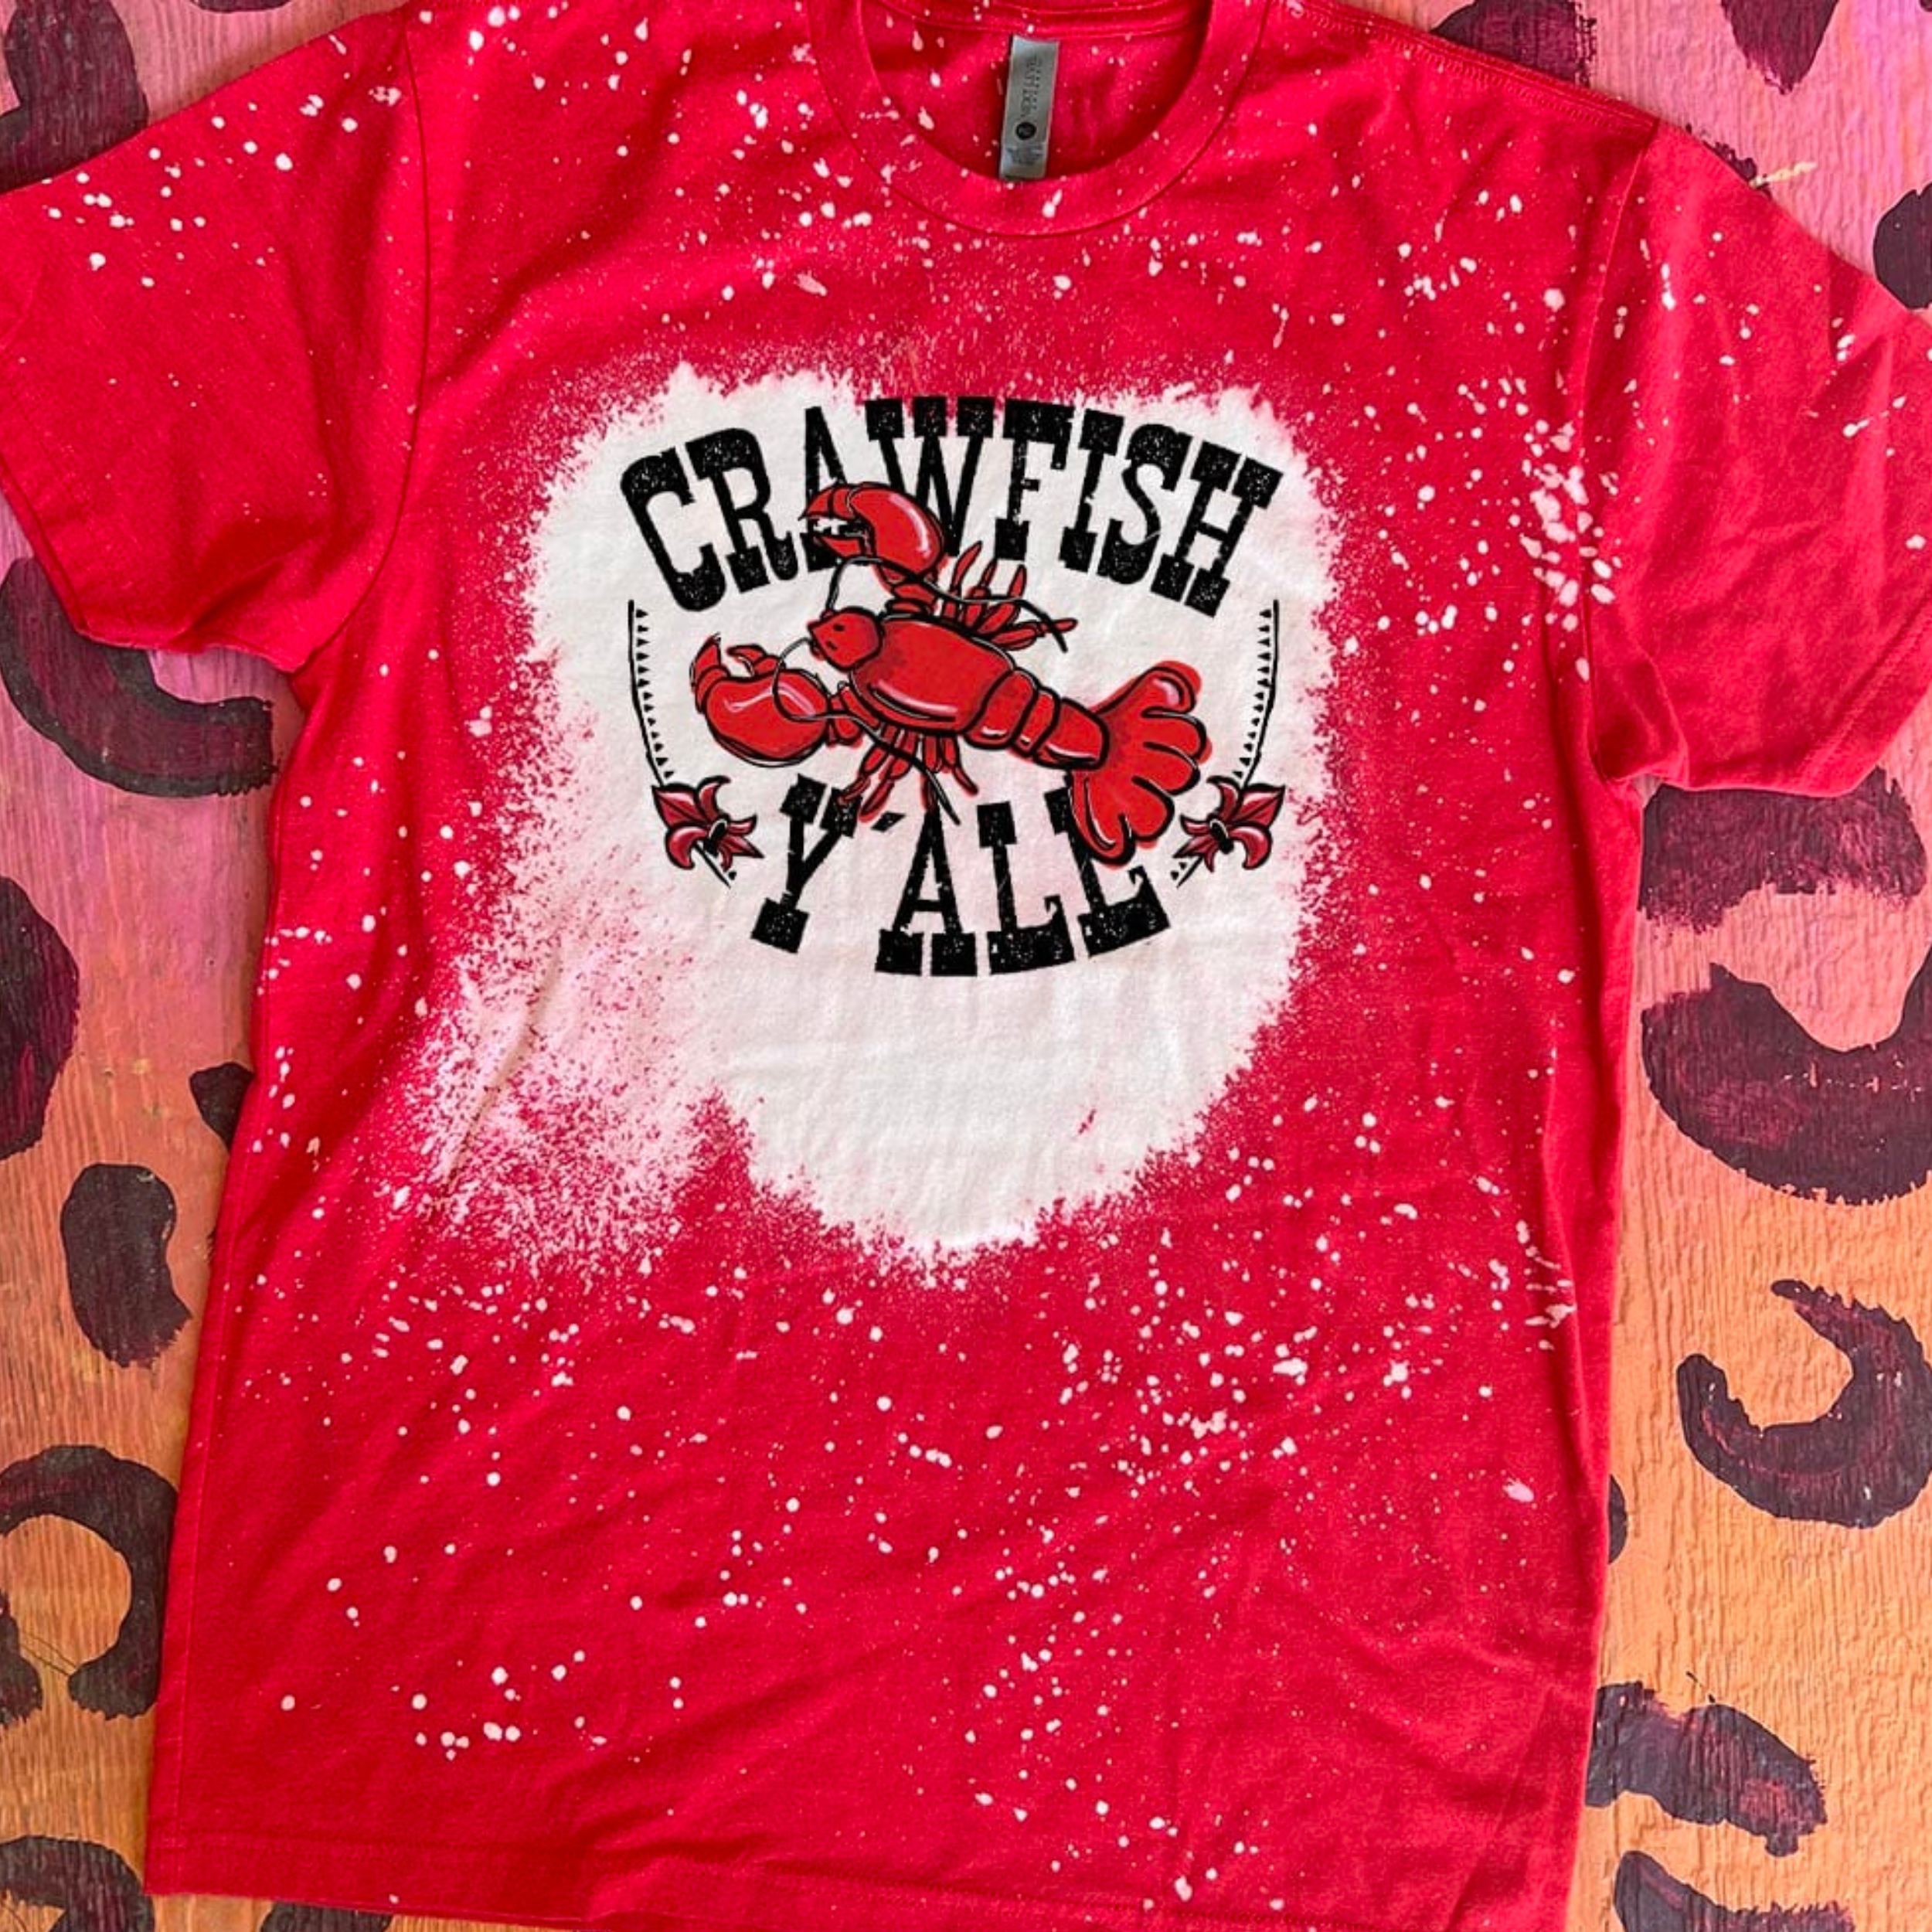 A red tee shirt with short sleeves and a crew neckline with a bleach splatter graphic crawfish that says "crawfish y'all." This tee shirt is pictured on a leopard print background.